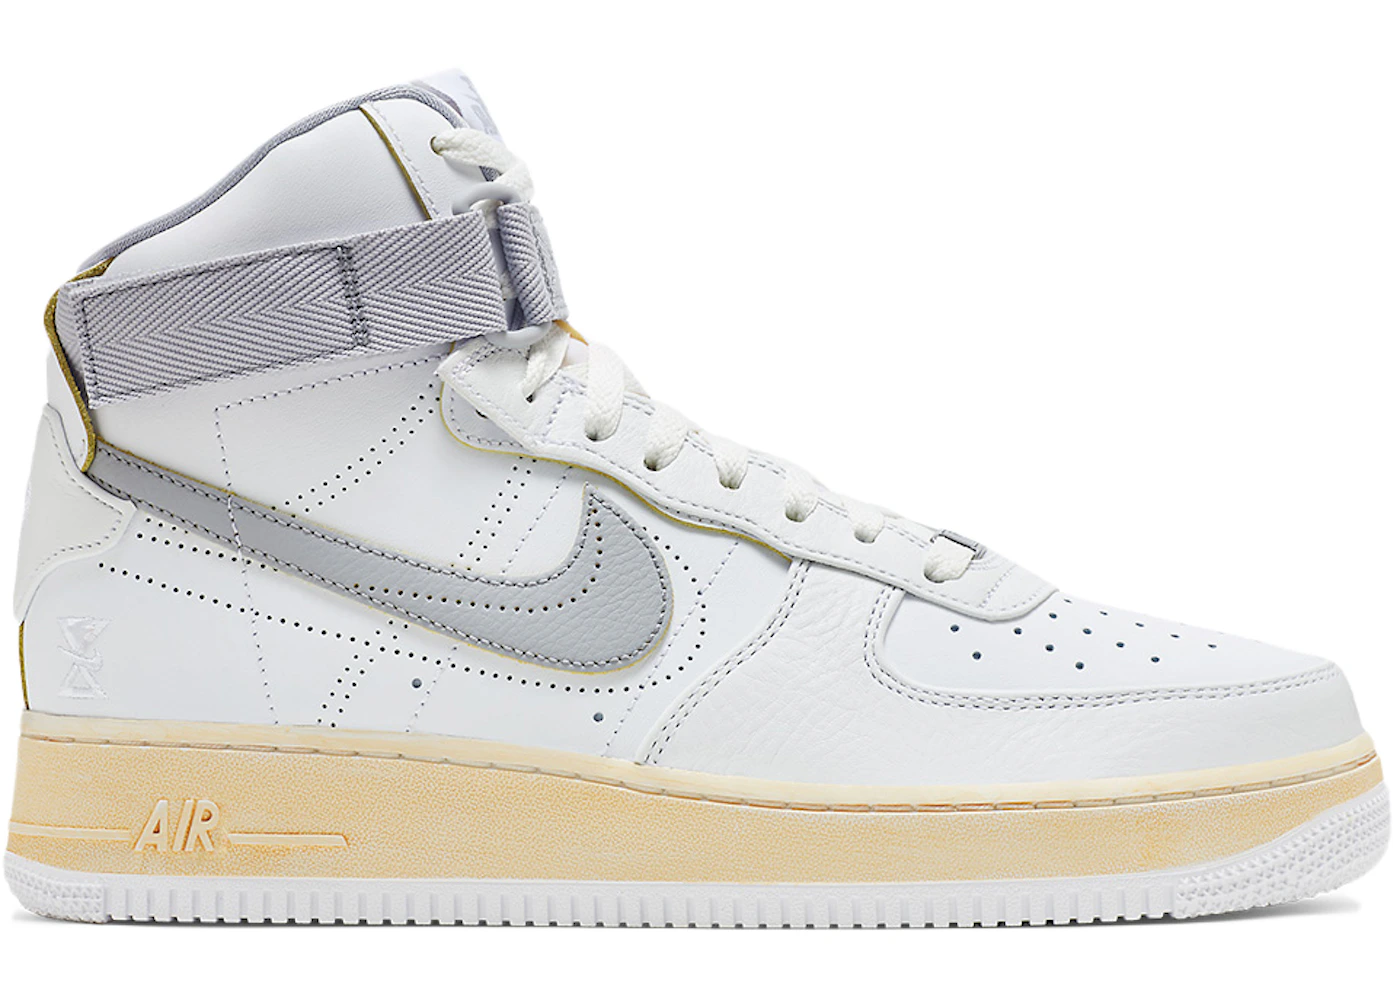 Nike Air Force 1 High Double Layer White Men's - DV4245-101 - US